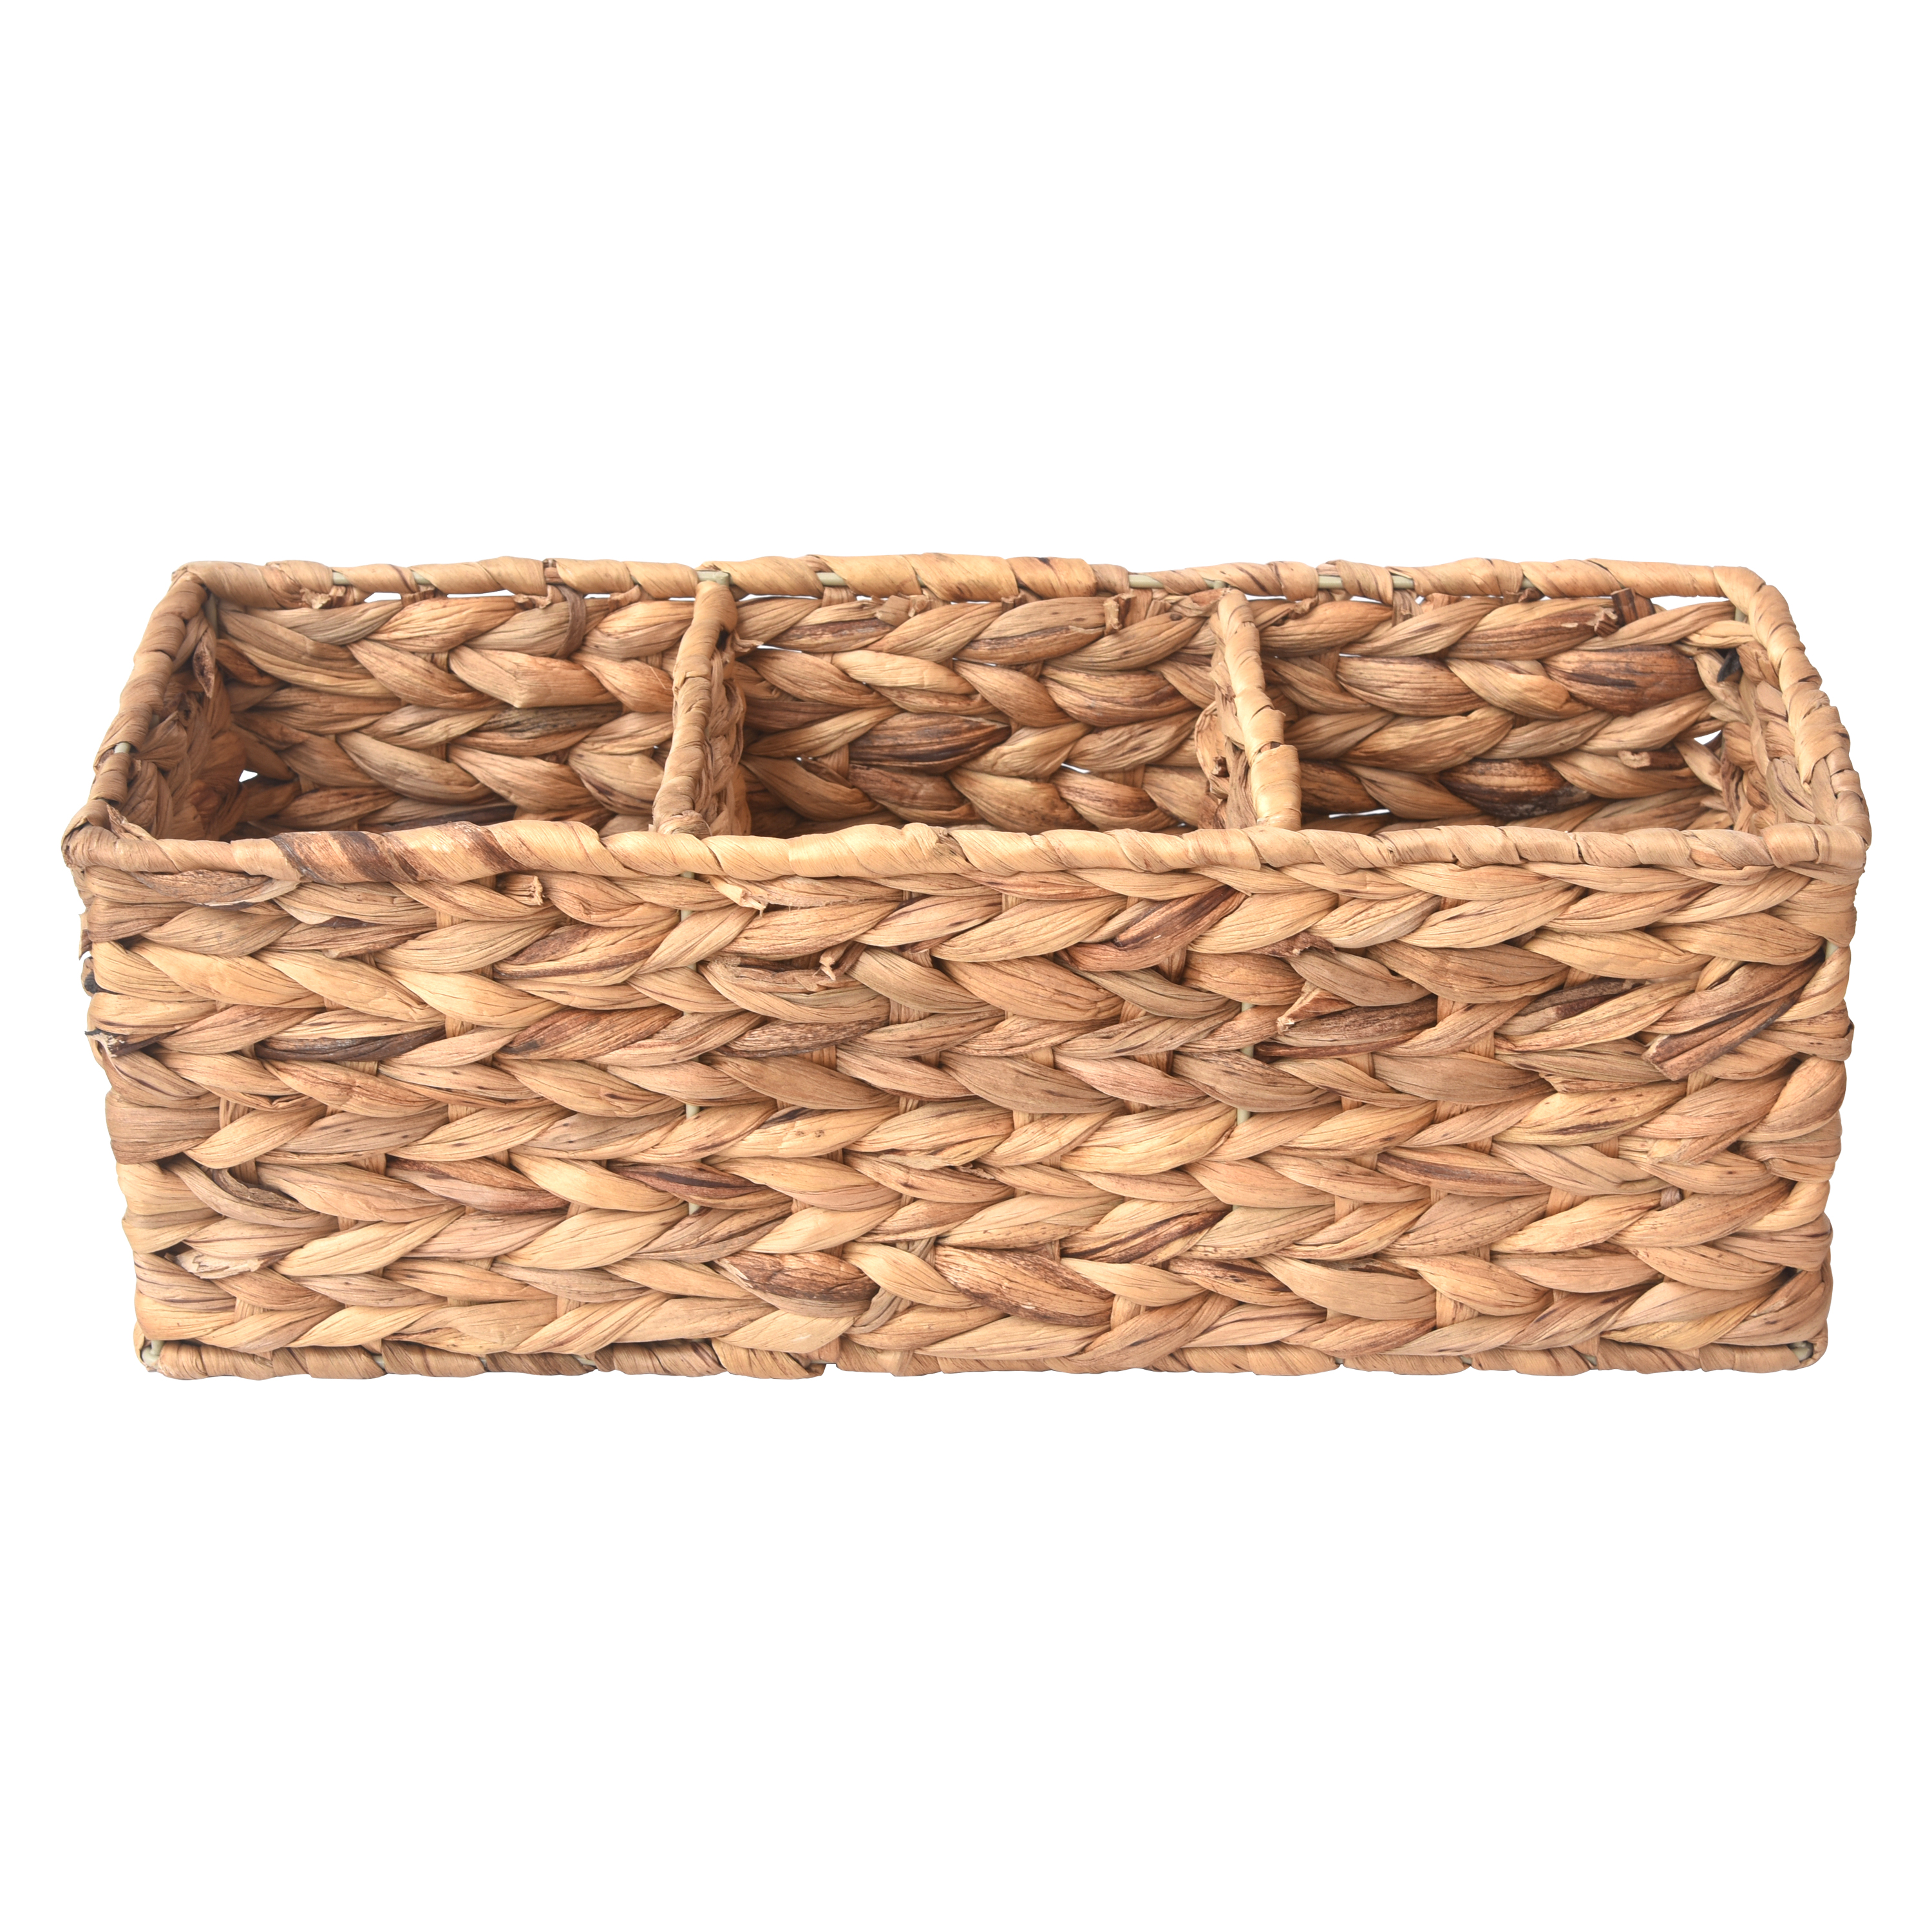 Better Homes & Gardens Woven Water Hyacinth Tank Basket, Natural - image 4 of 6